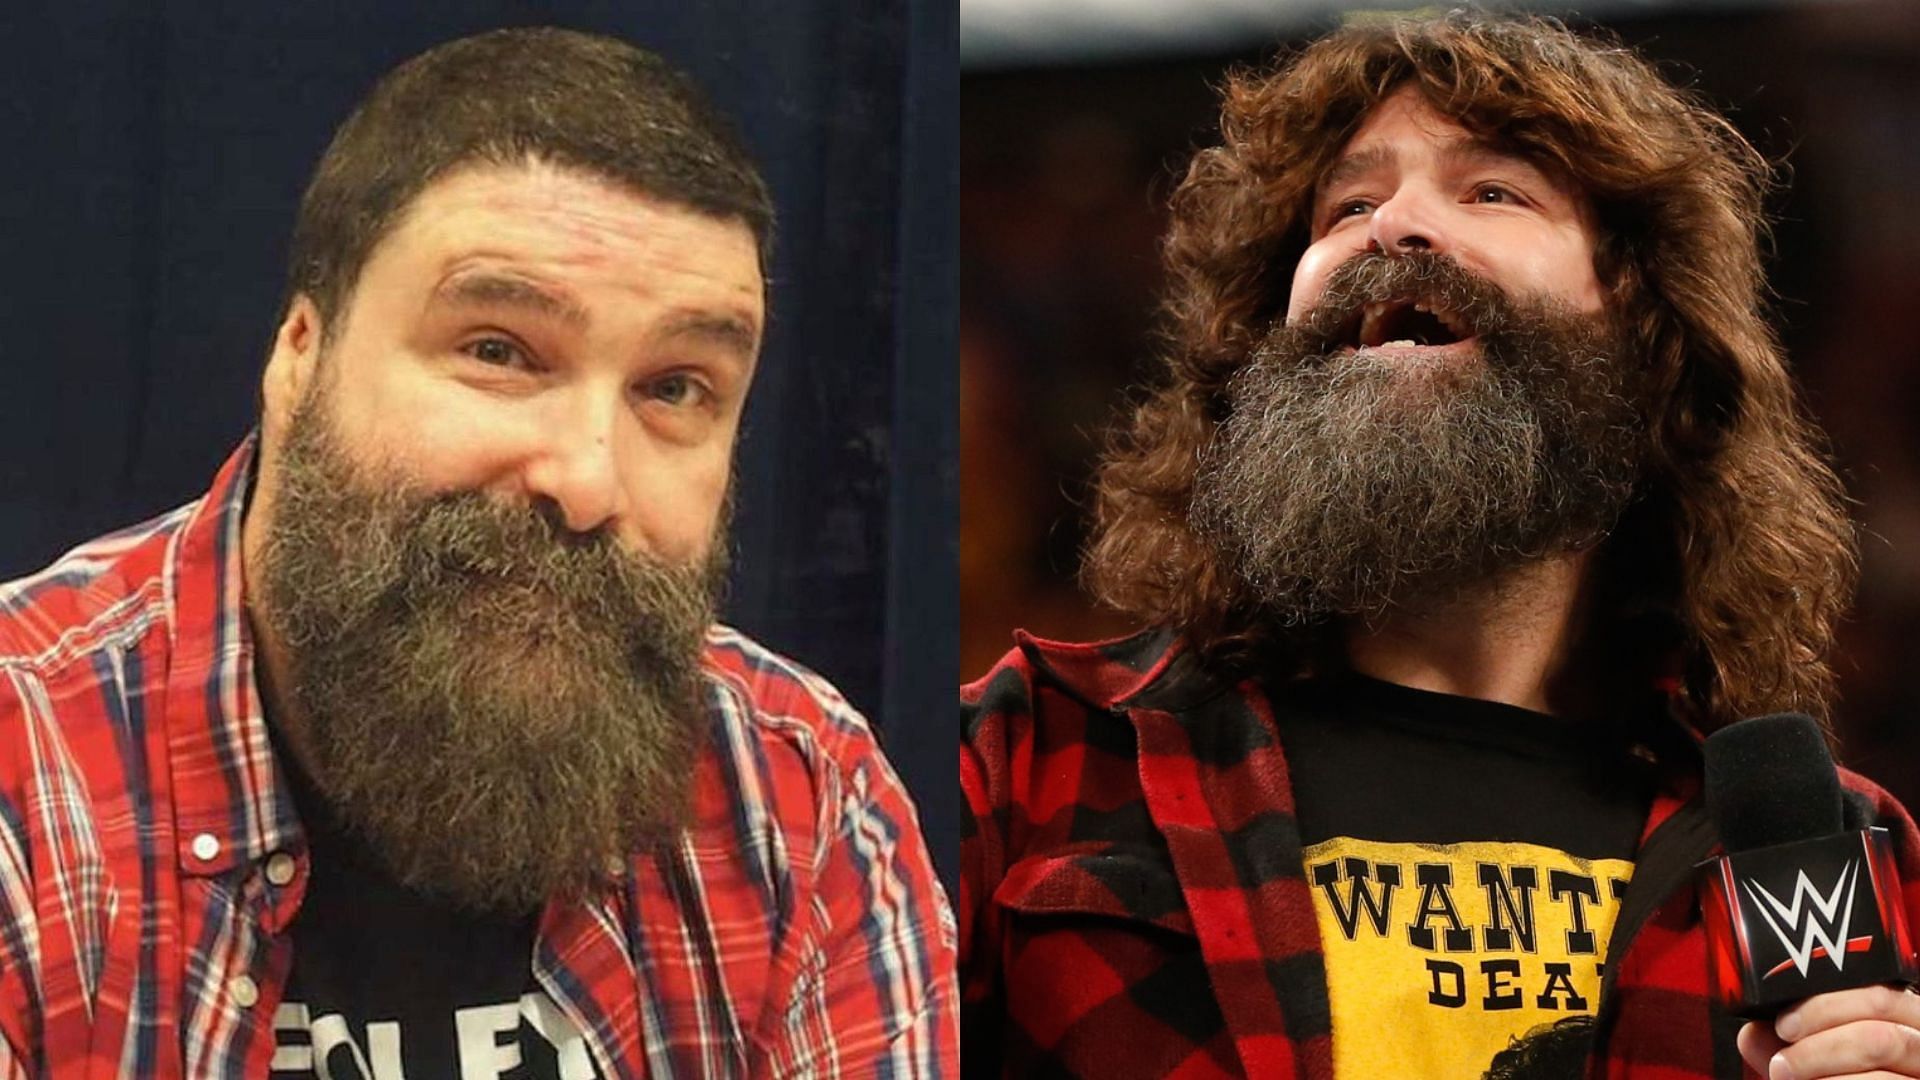 Mick Foley is a member of the WWE Hall of Fame.